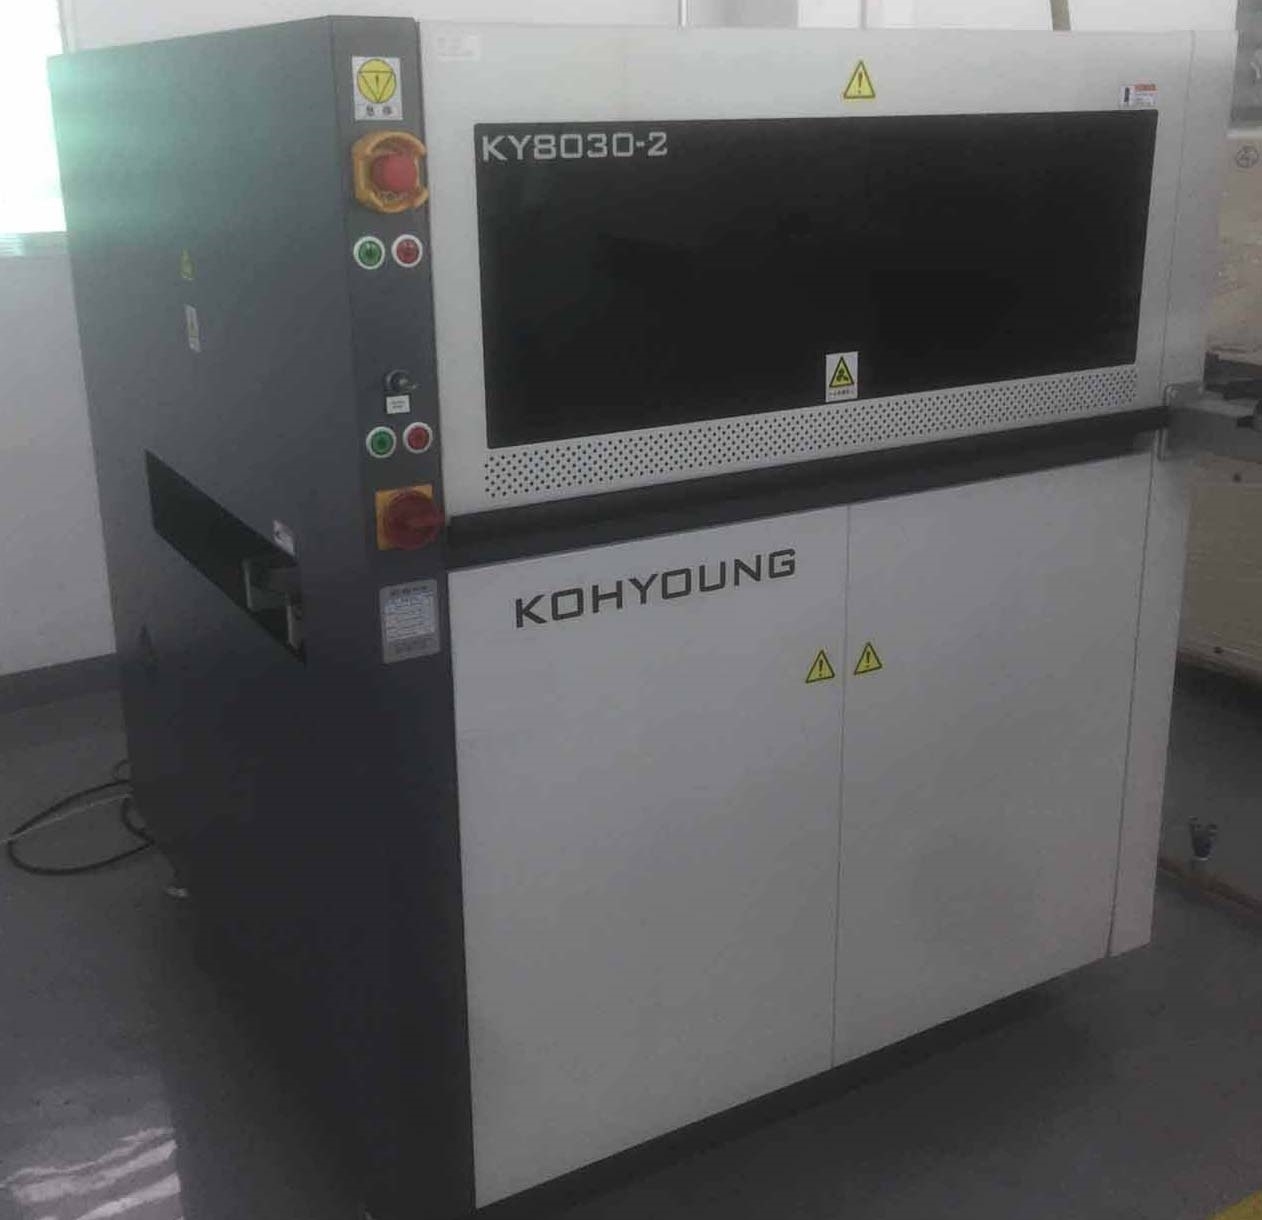 KOH-YOUNG KY 8030-2